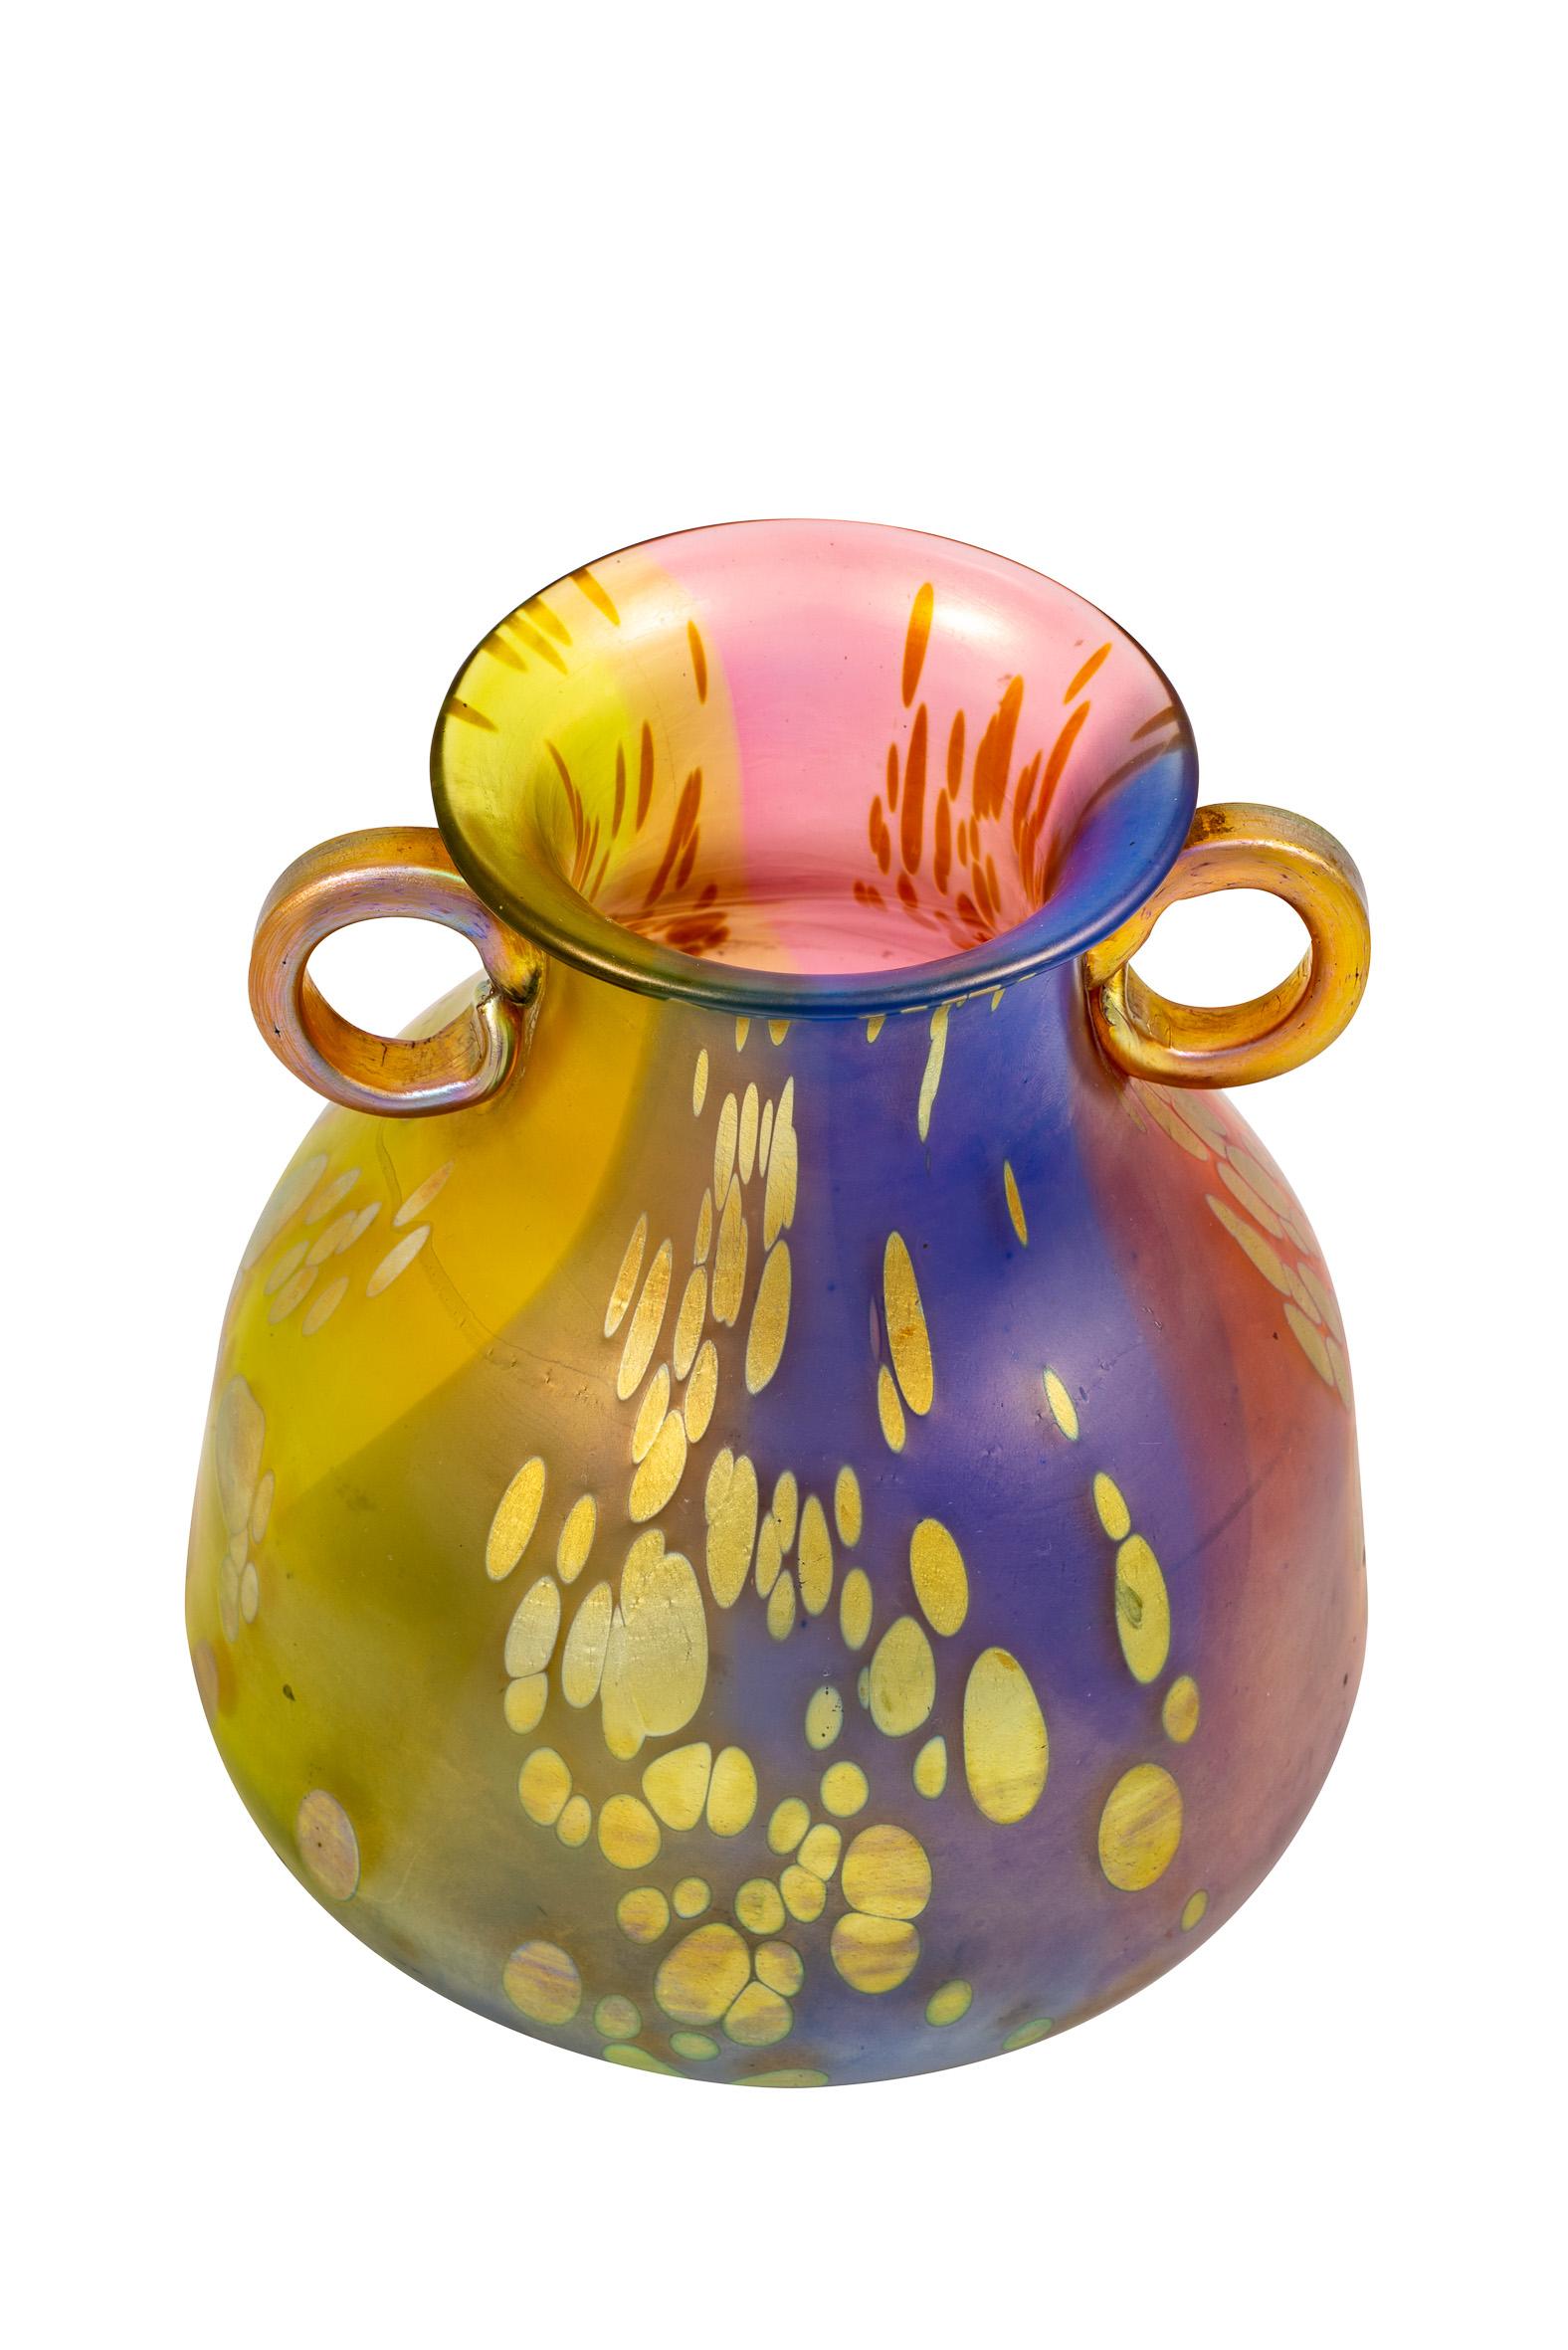 Vase manufactured by Johann Loetz Witwe Tricolore decoration ca. 1900 Austrian Jugendstil glass mould-blown reduced and iridescent Rainbow Colors Blue Red Green Yellow

This group of vases with the decoration 